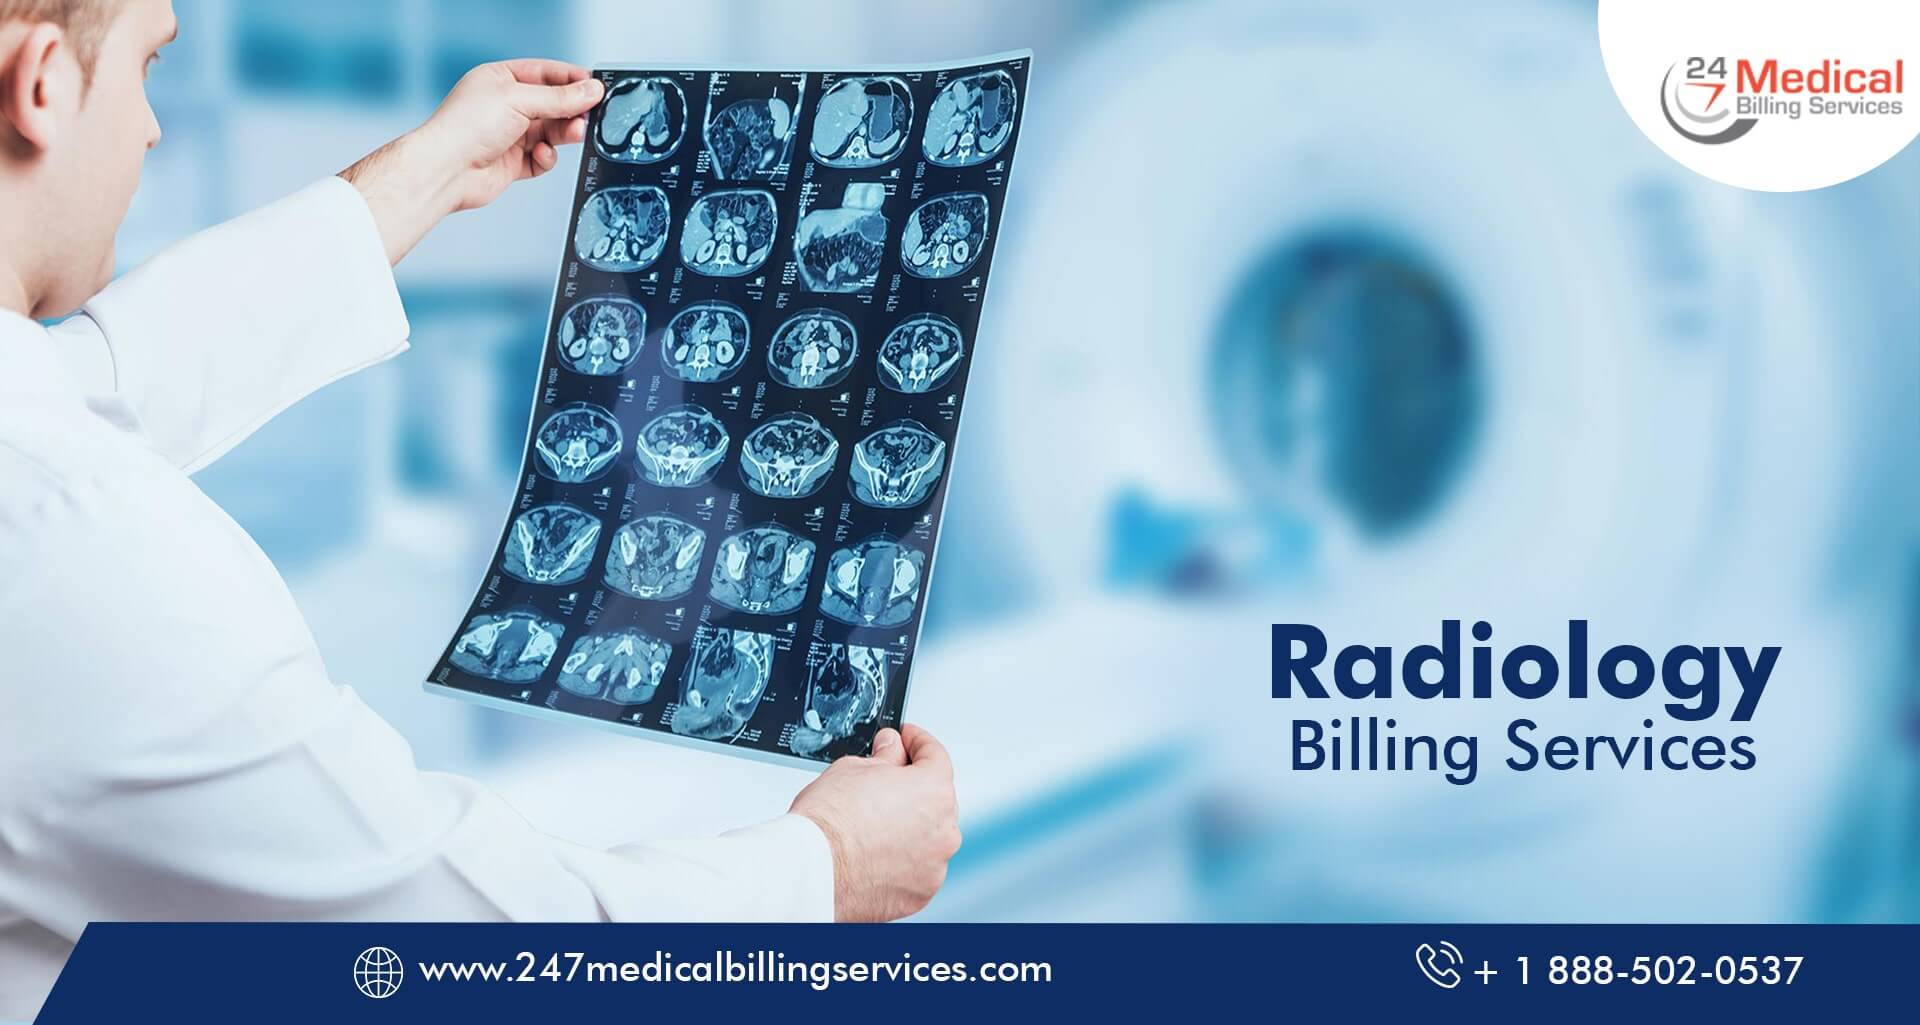  Radiology Billing Services in Minnesota (MN)